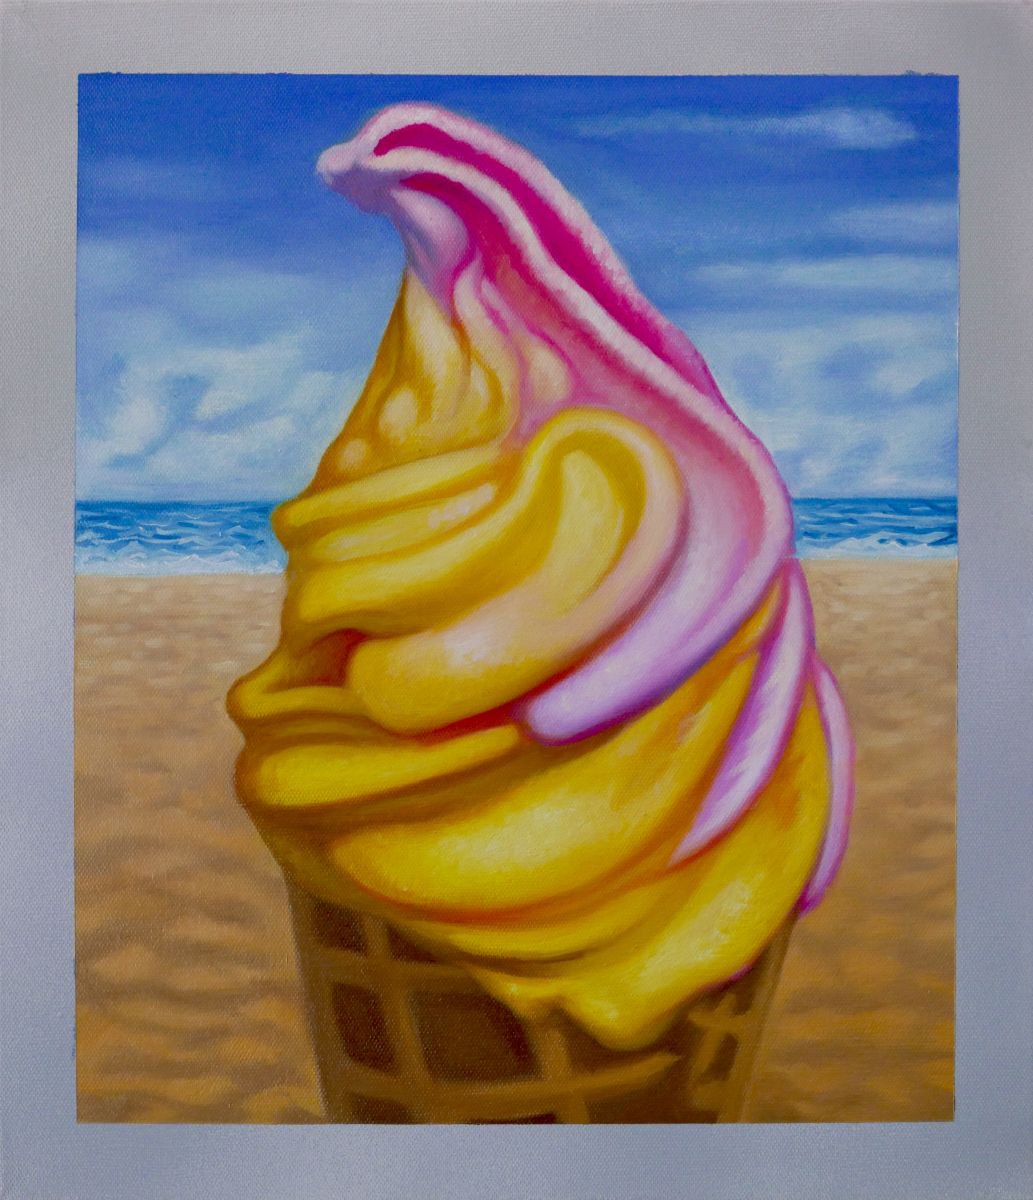 Soft serve (ice-cream) N�2 / Glace italienne N�2 by Philippe Olivier